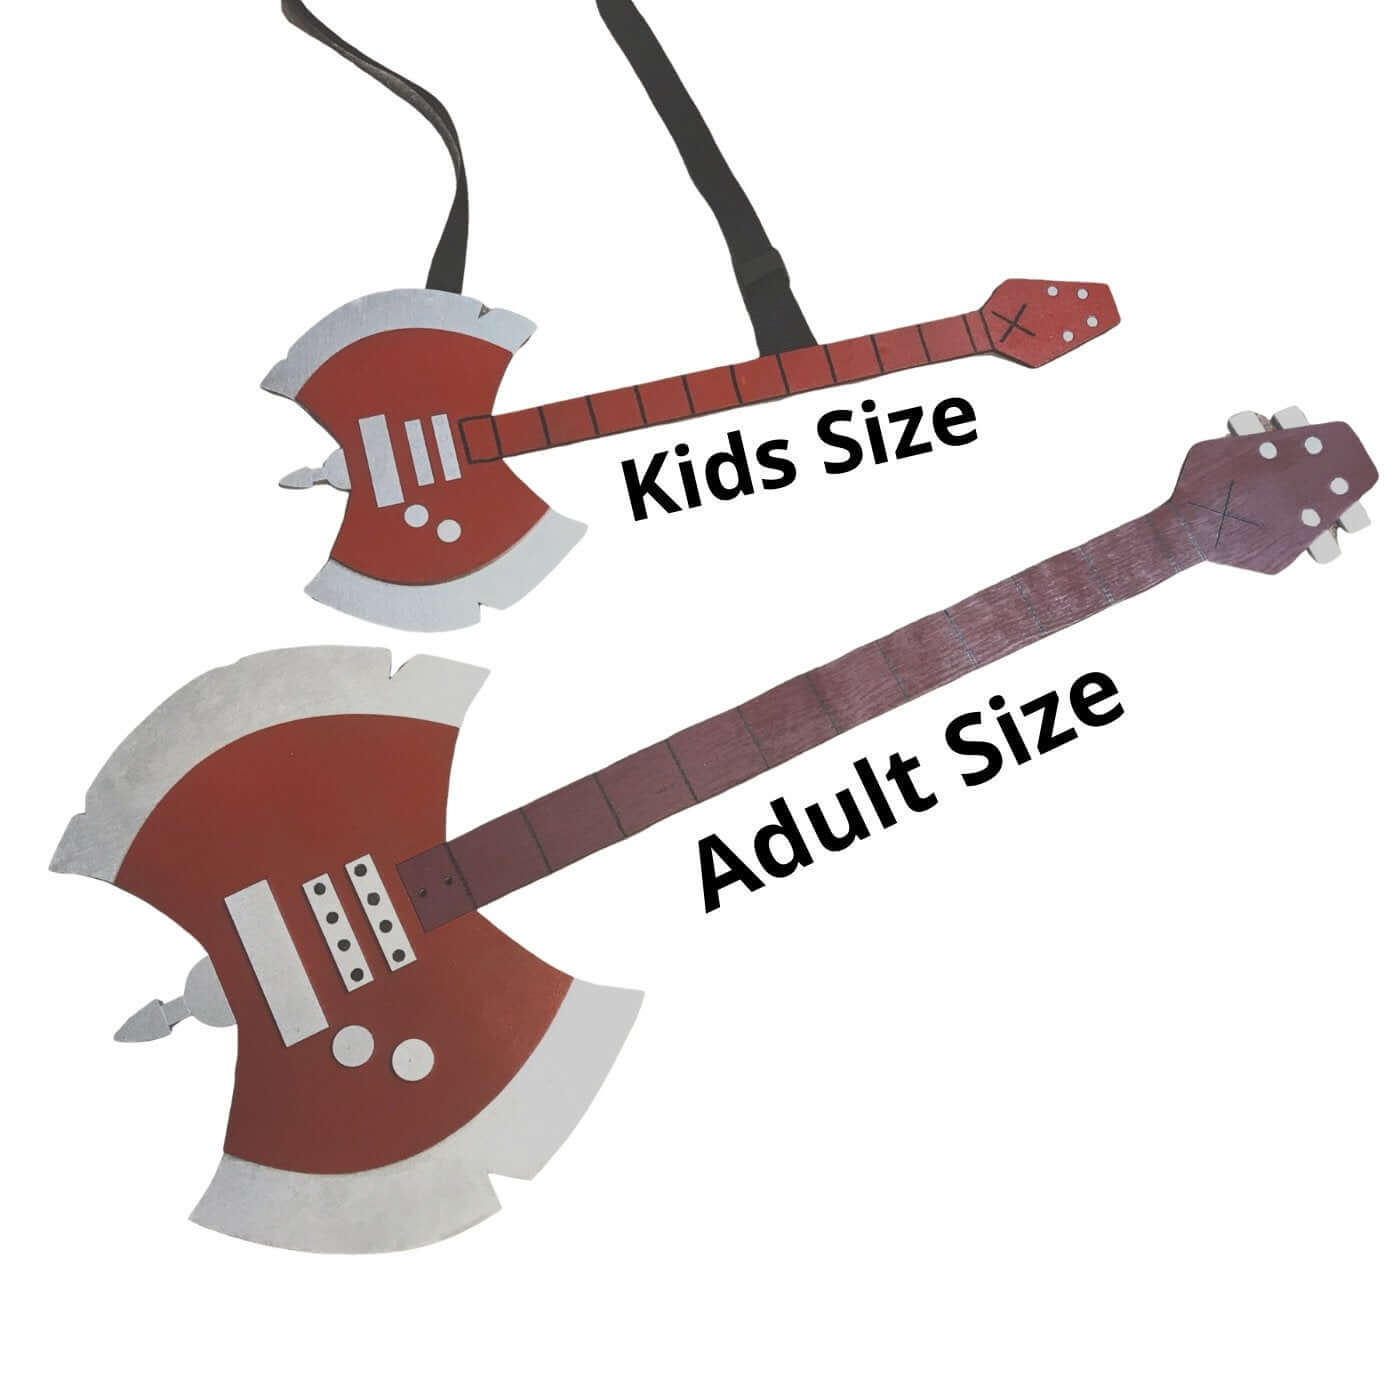 Kids or Adult Size Marceline Axe Guitar from Adventure Time